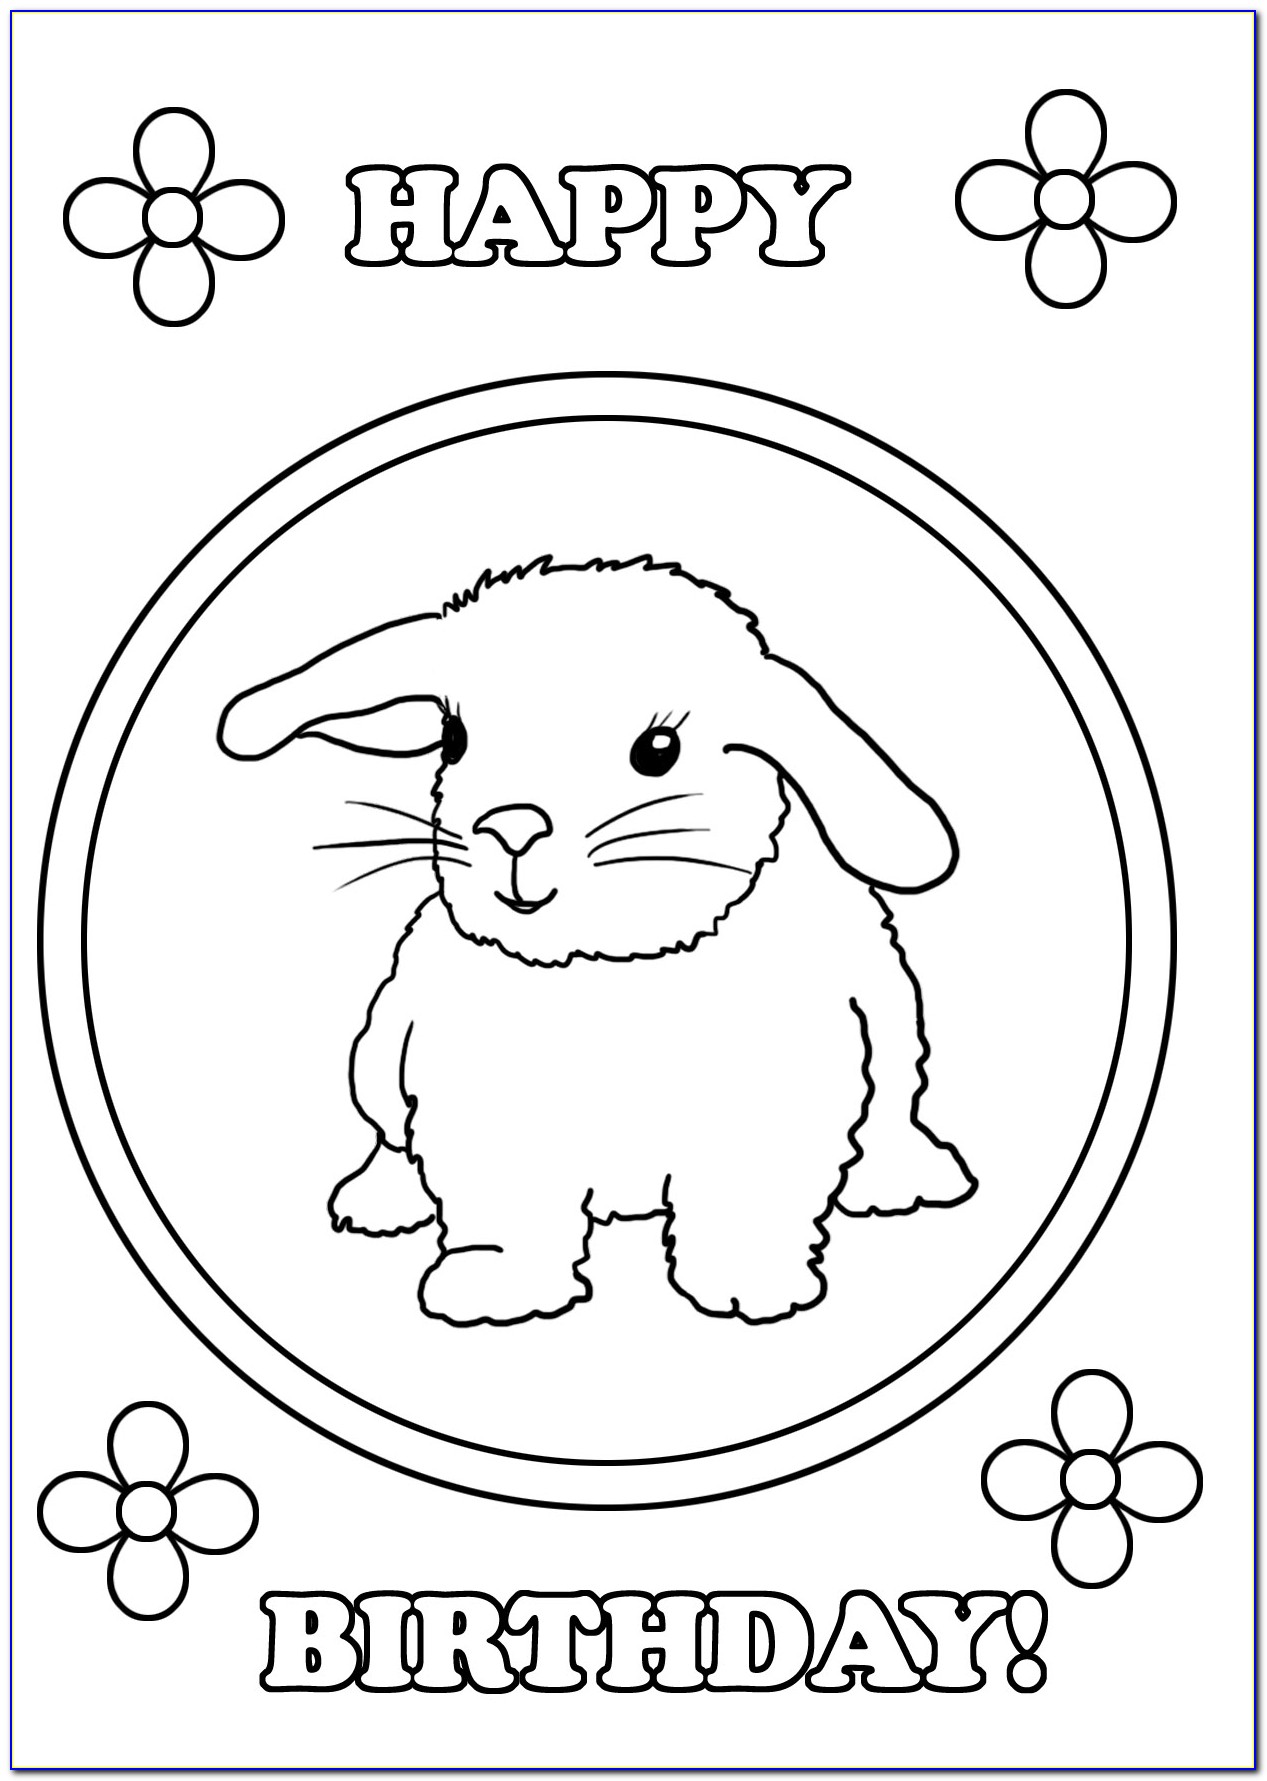 Free Printable Birthday Cards Coloring Pages